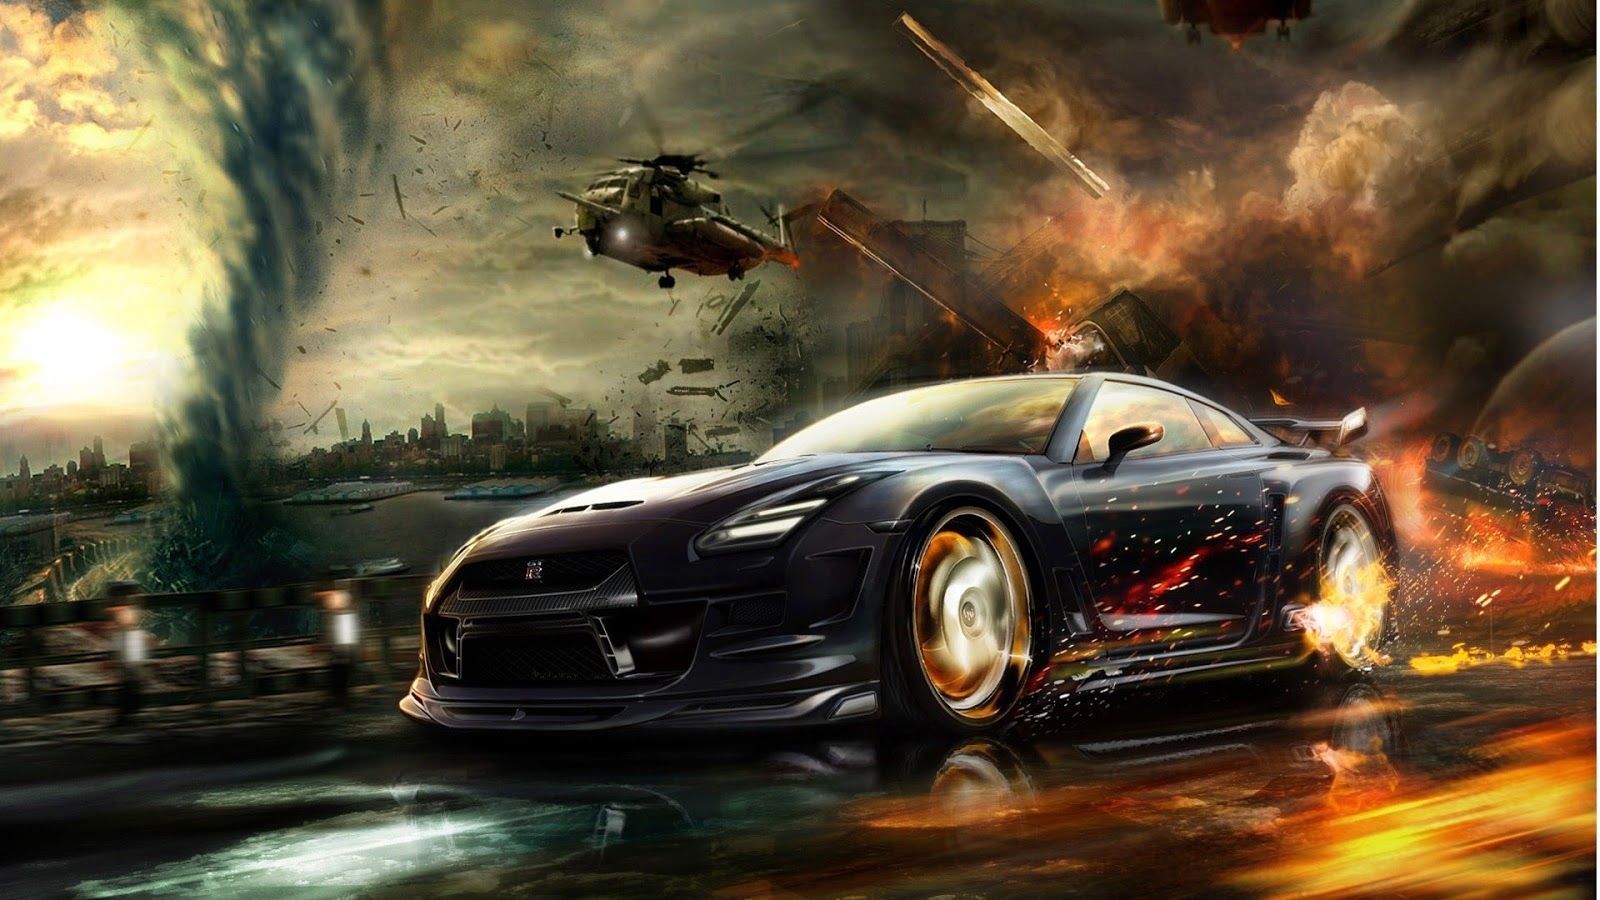 Cool Car Backgrounds Wallpapers - Wallpaper Cave